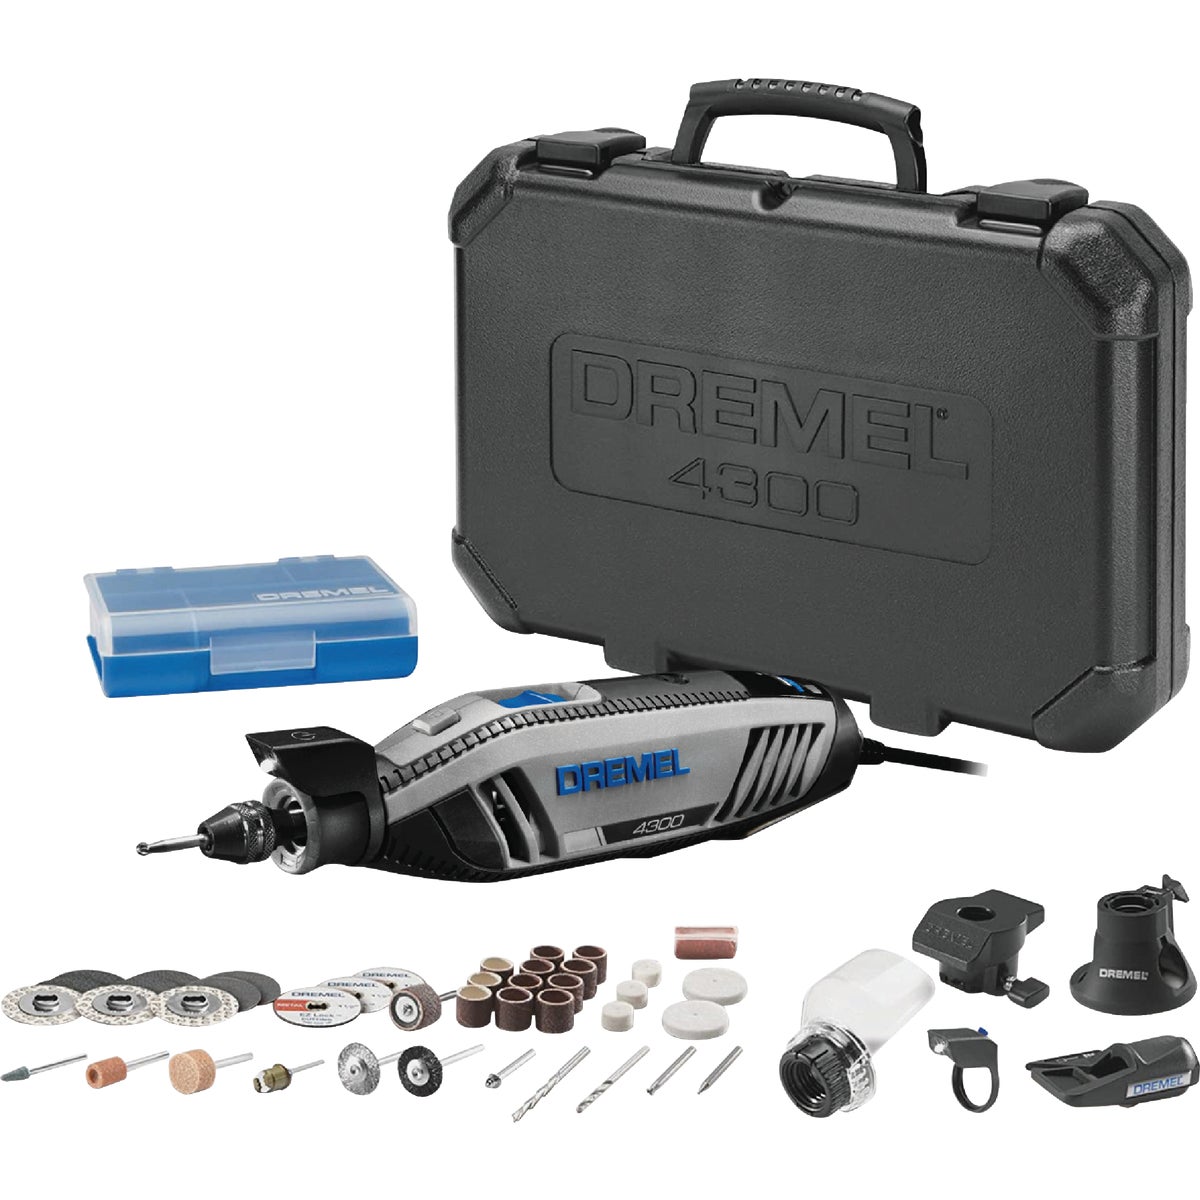 Dremel 4300 Series 120-Volt 1.8-Amp Variable Speed Electric Rotary Tool Kit